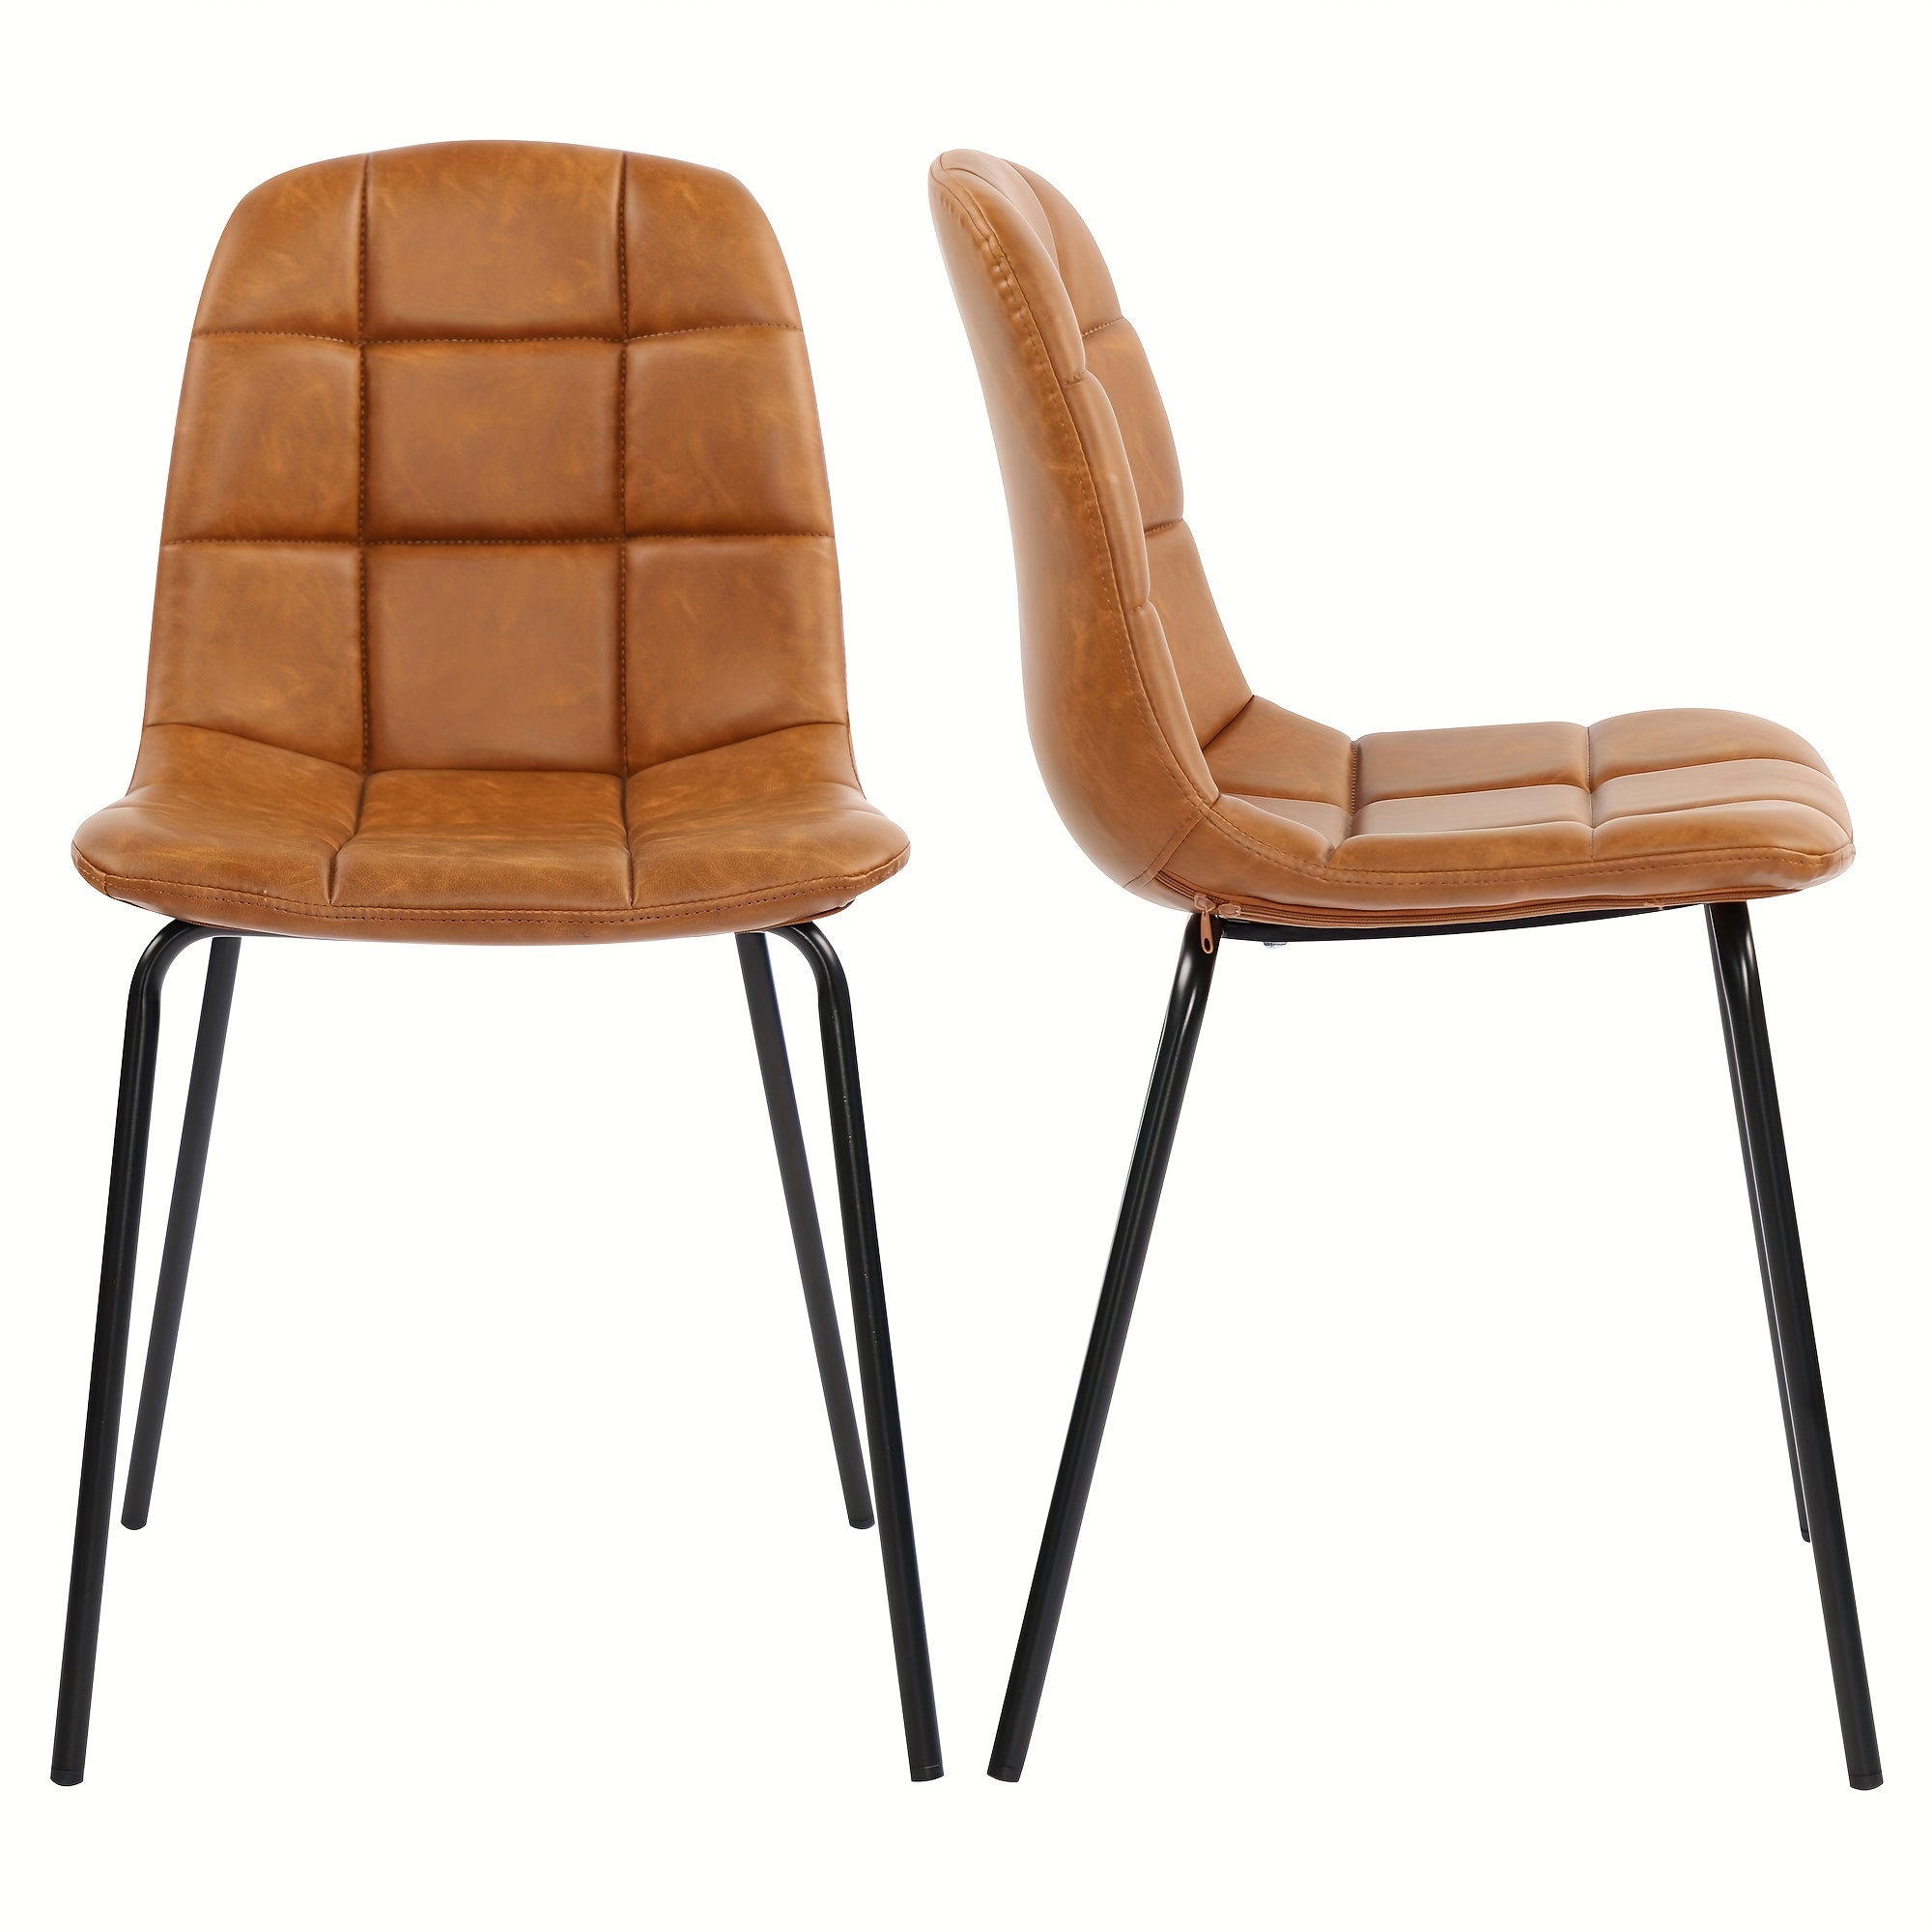 

Modern Brown Dining Chairs, Upholstered Pu Leather Dining Chairs With Metal Legs, Set Of 2